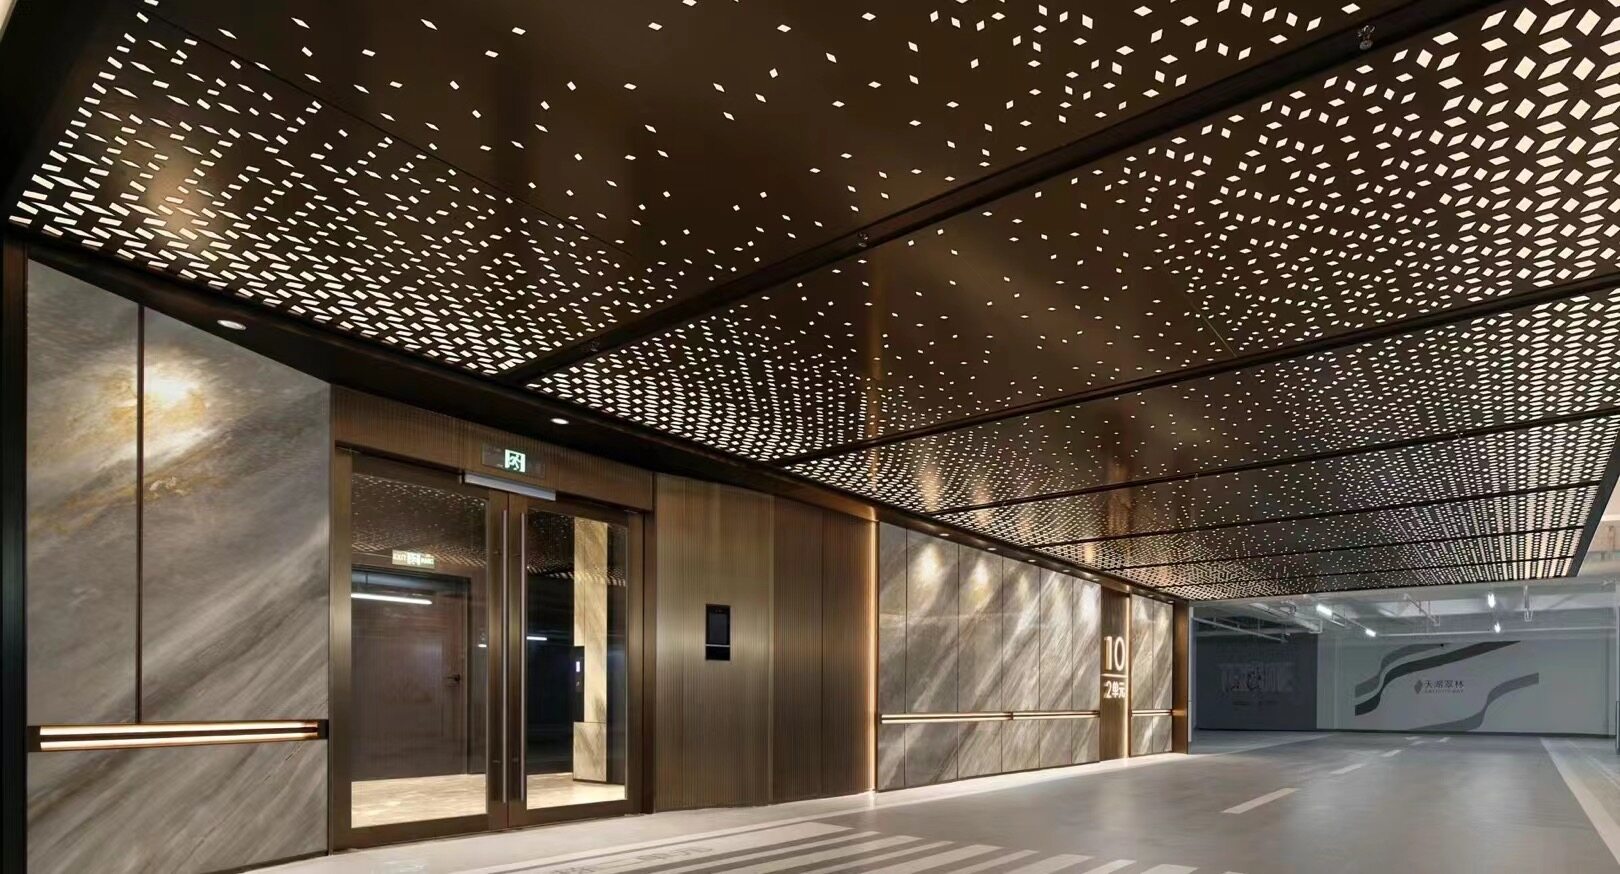 Perforated Metal Ceiling luxury modern design for ceiling decoration